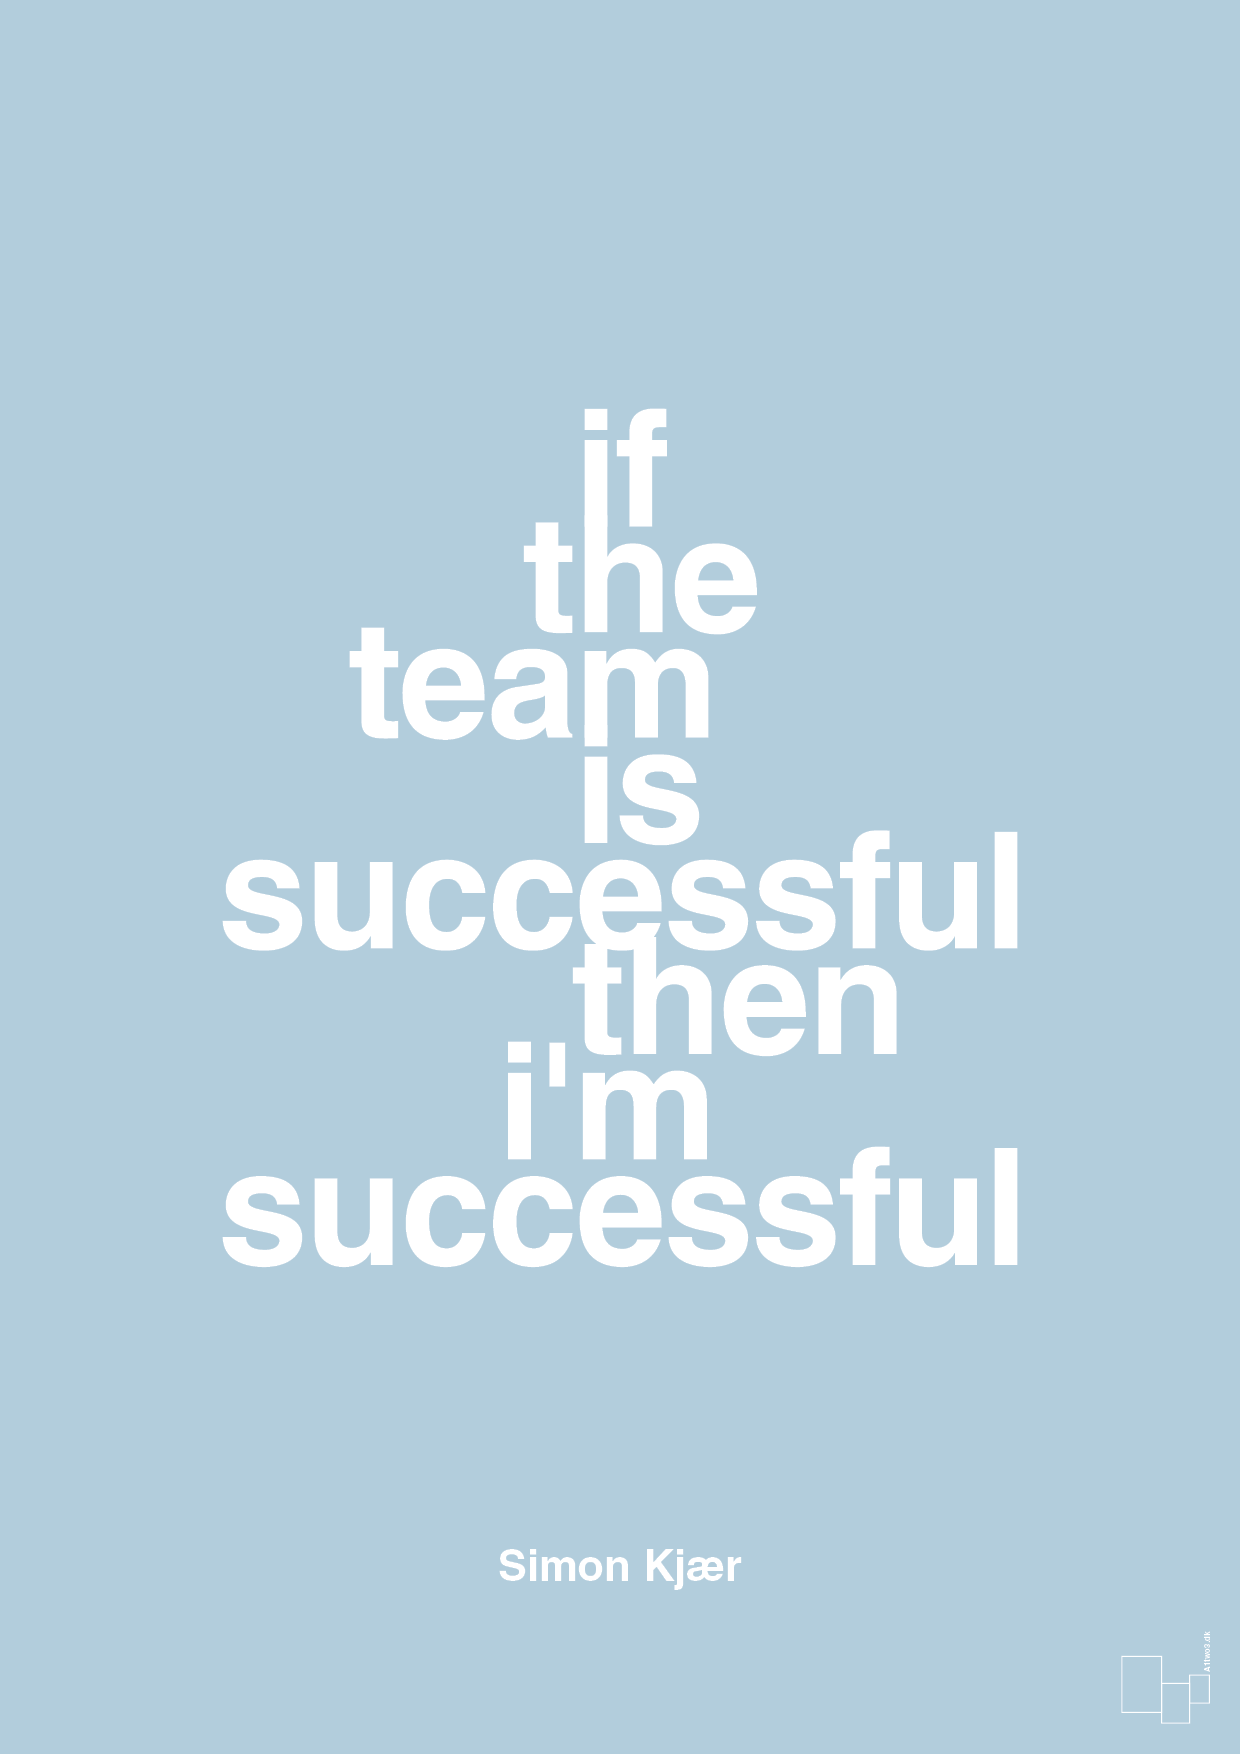 if the team is successful then i'm successful - Plakat med Citater i Heavenly Blue